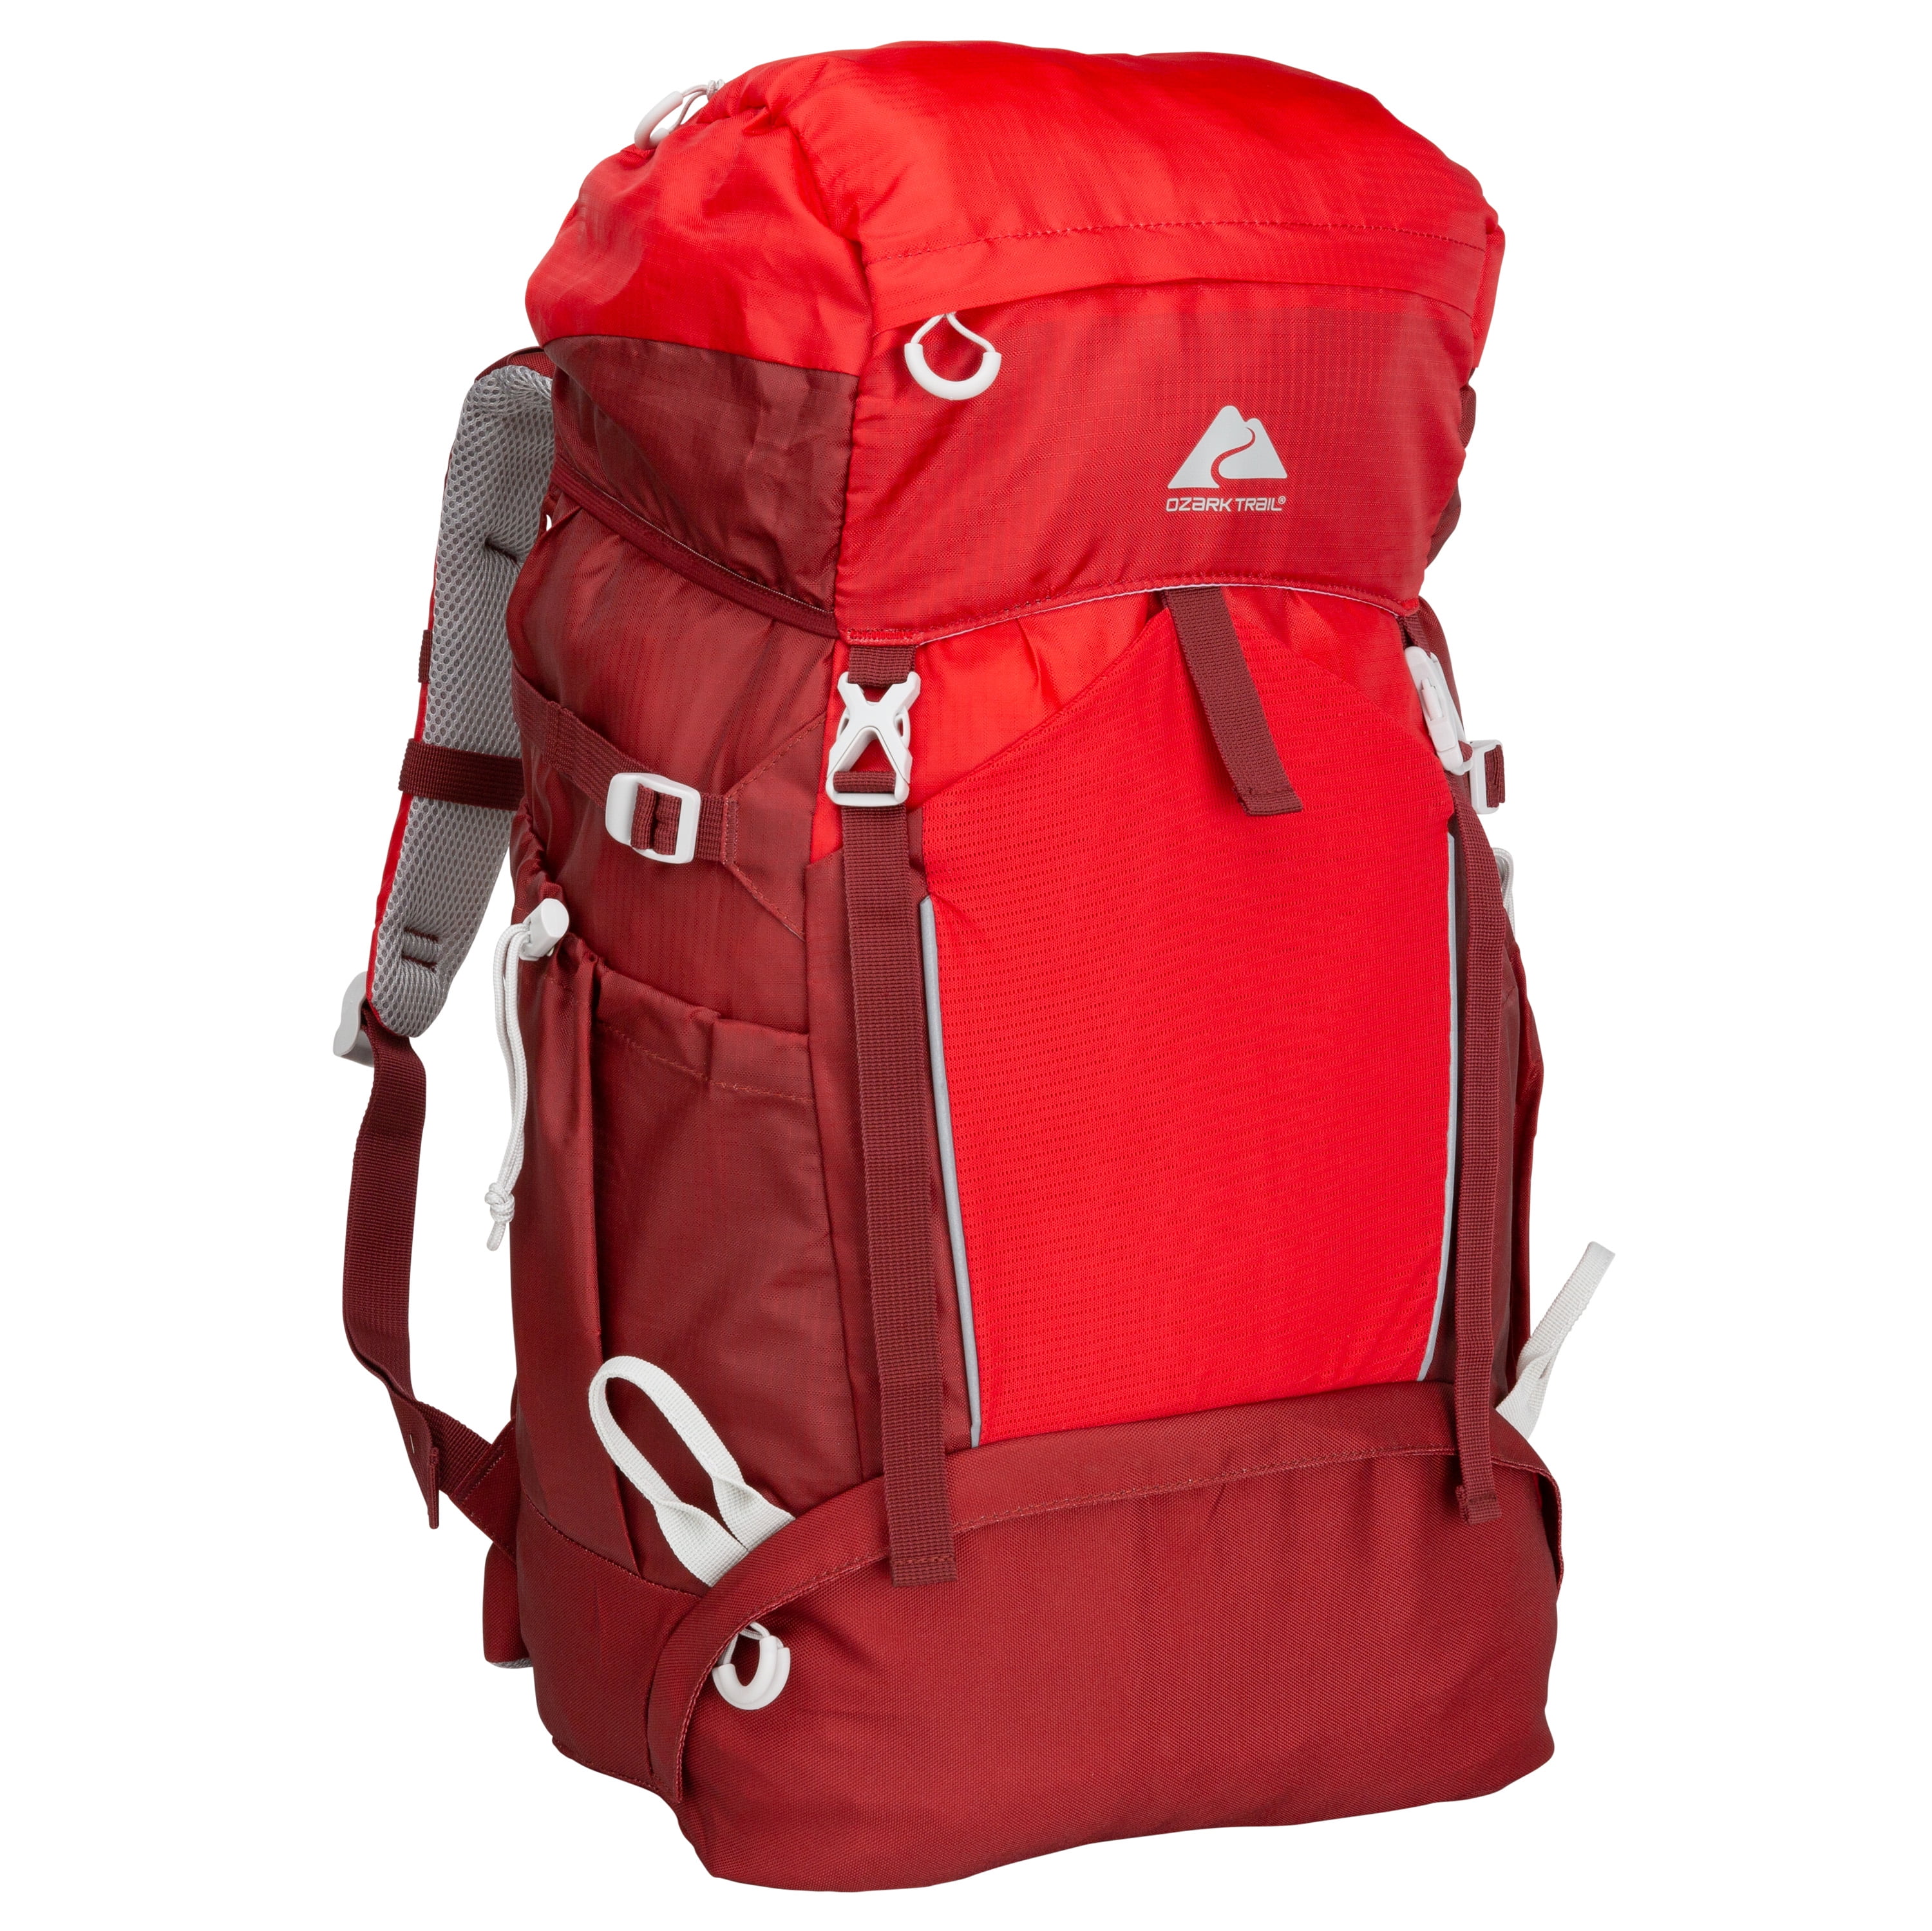 Atmos AG 65L - Light Technical Comfortable Multi-Day Pack- Backpacking